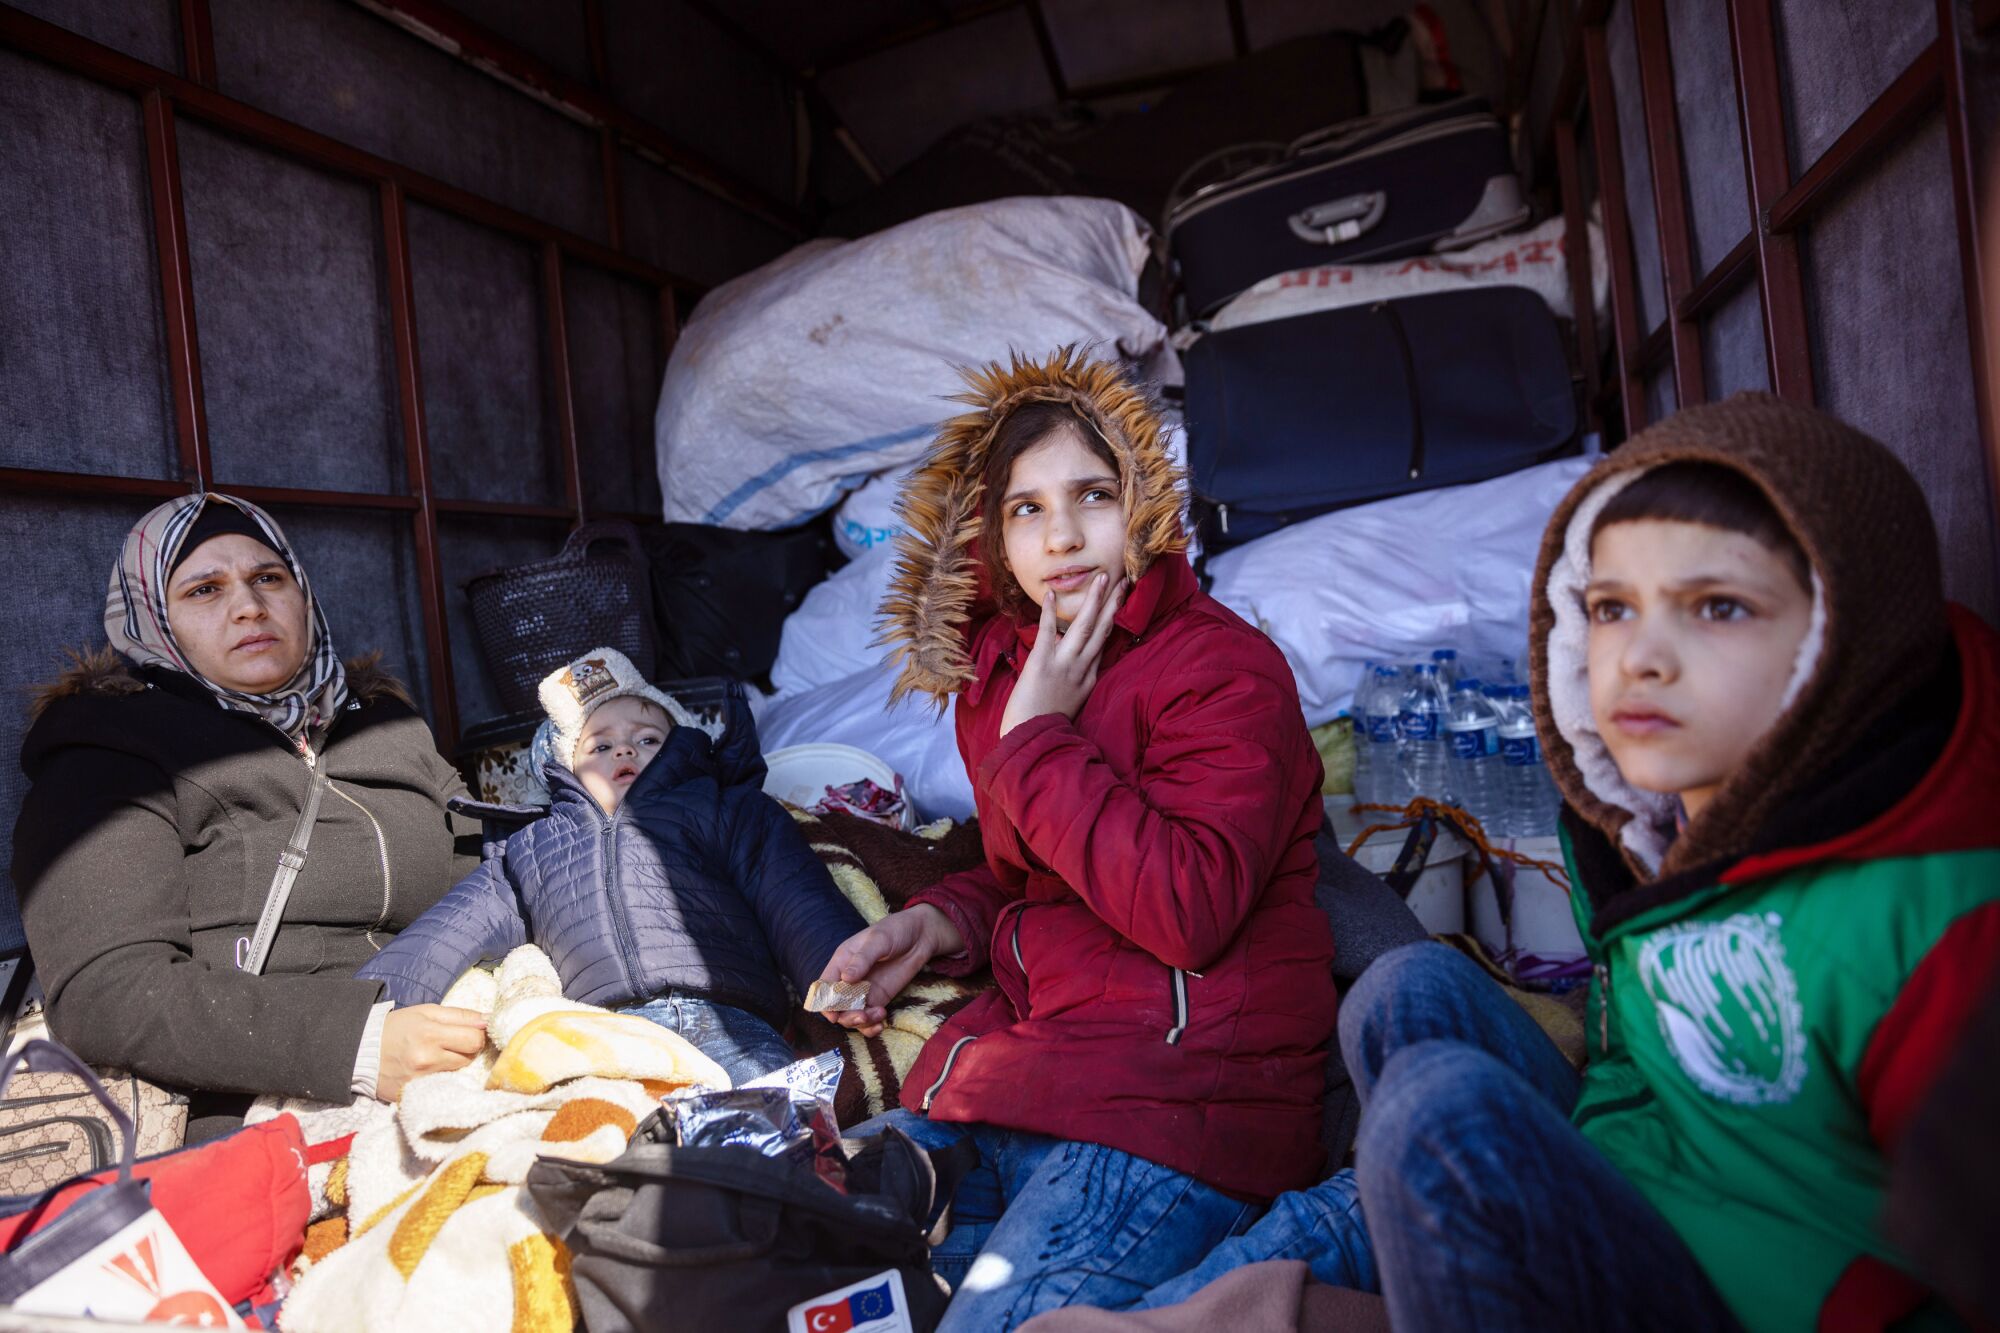 A woman sits in the back of a truck with several children, all wearing coats.